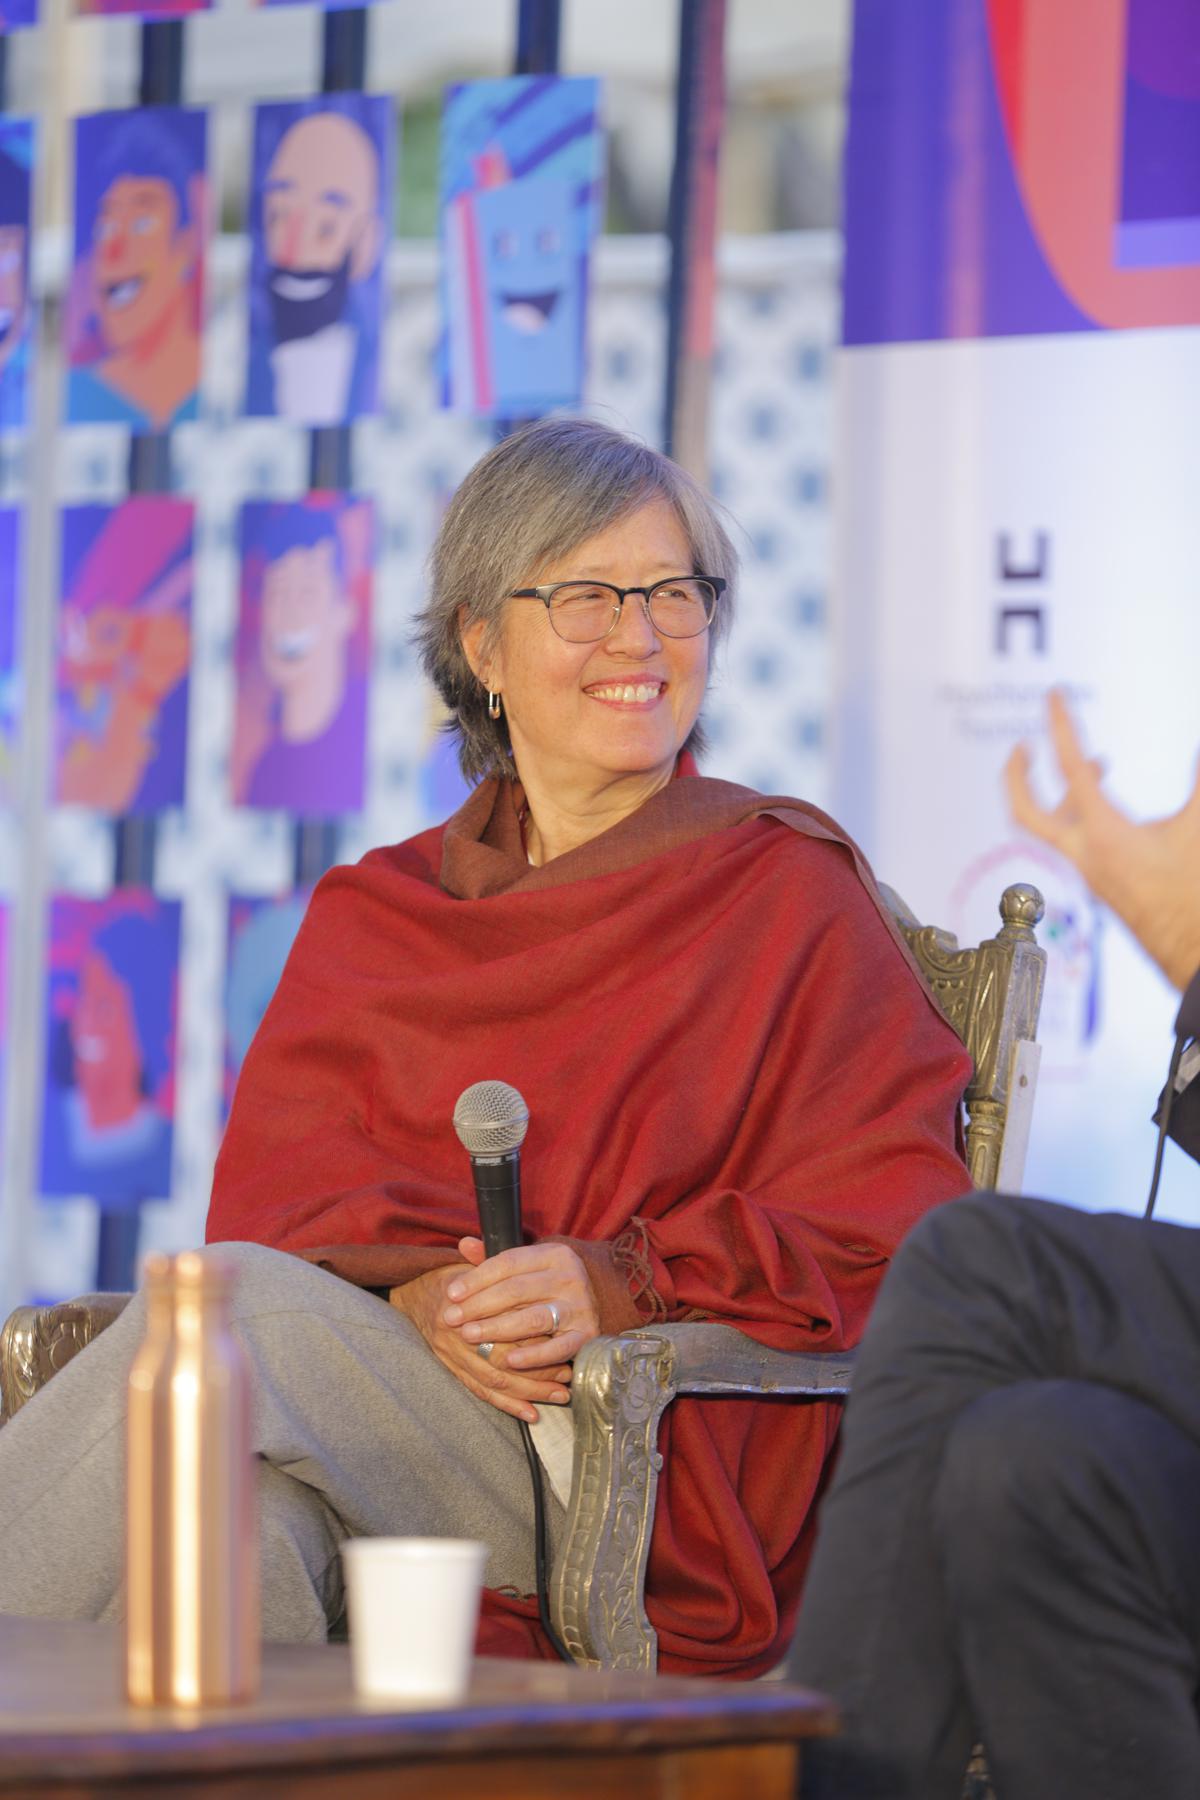 American-Canadian author Ruth Ozeki at the Jaipur Literature Festival 2023.